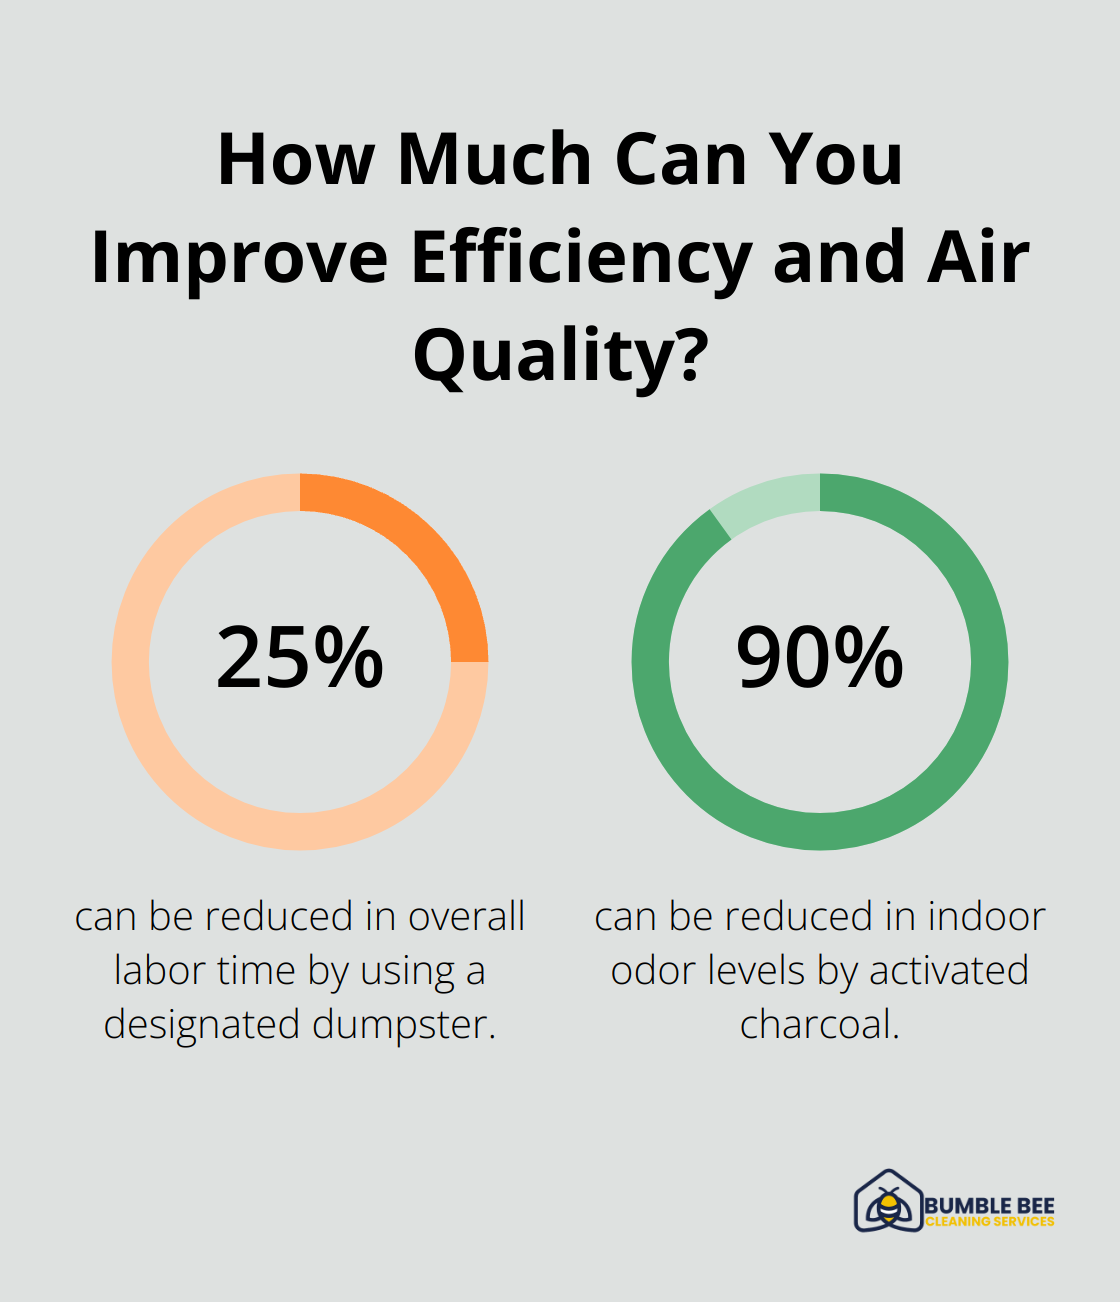 Fact - How Much Can You Improve Efficiency and Air Quality?